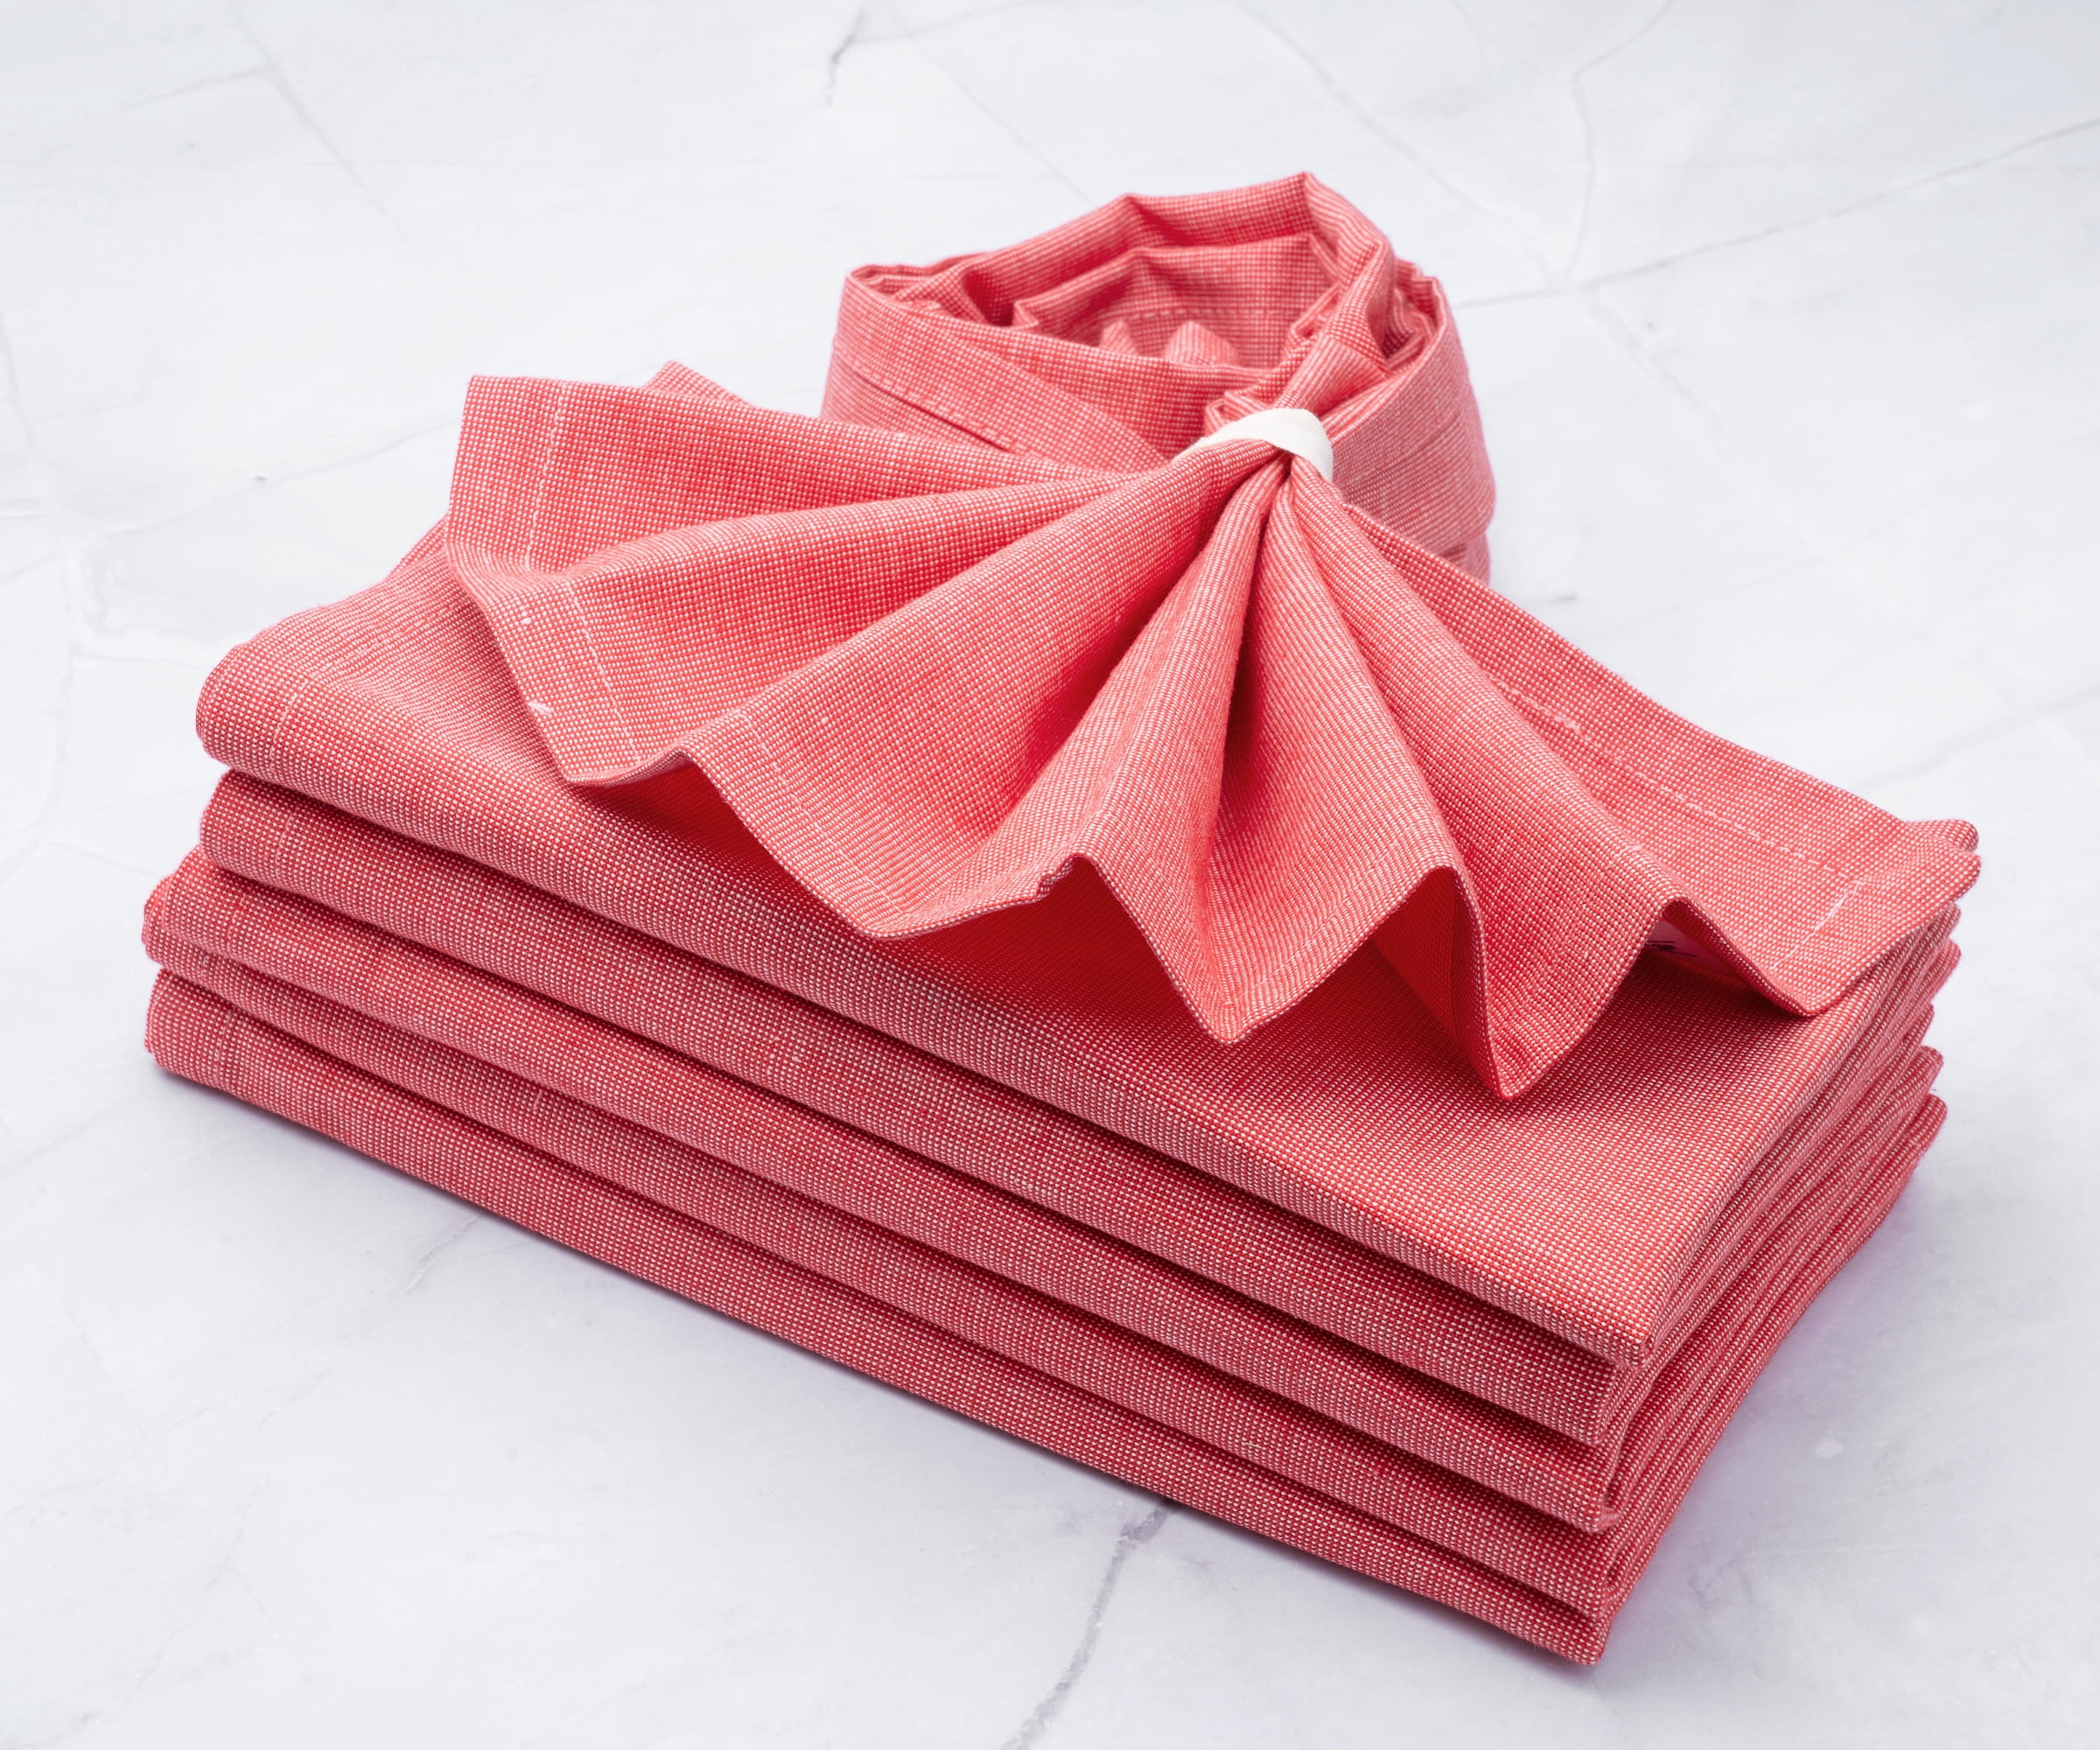 All Cotton and Linen Cloth Table Napkins Set of 6, Rust Cotton Napkins, Linen Dinner Napkins, Fall Cloth Napkins, Size: 20 x 20, Red